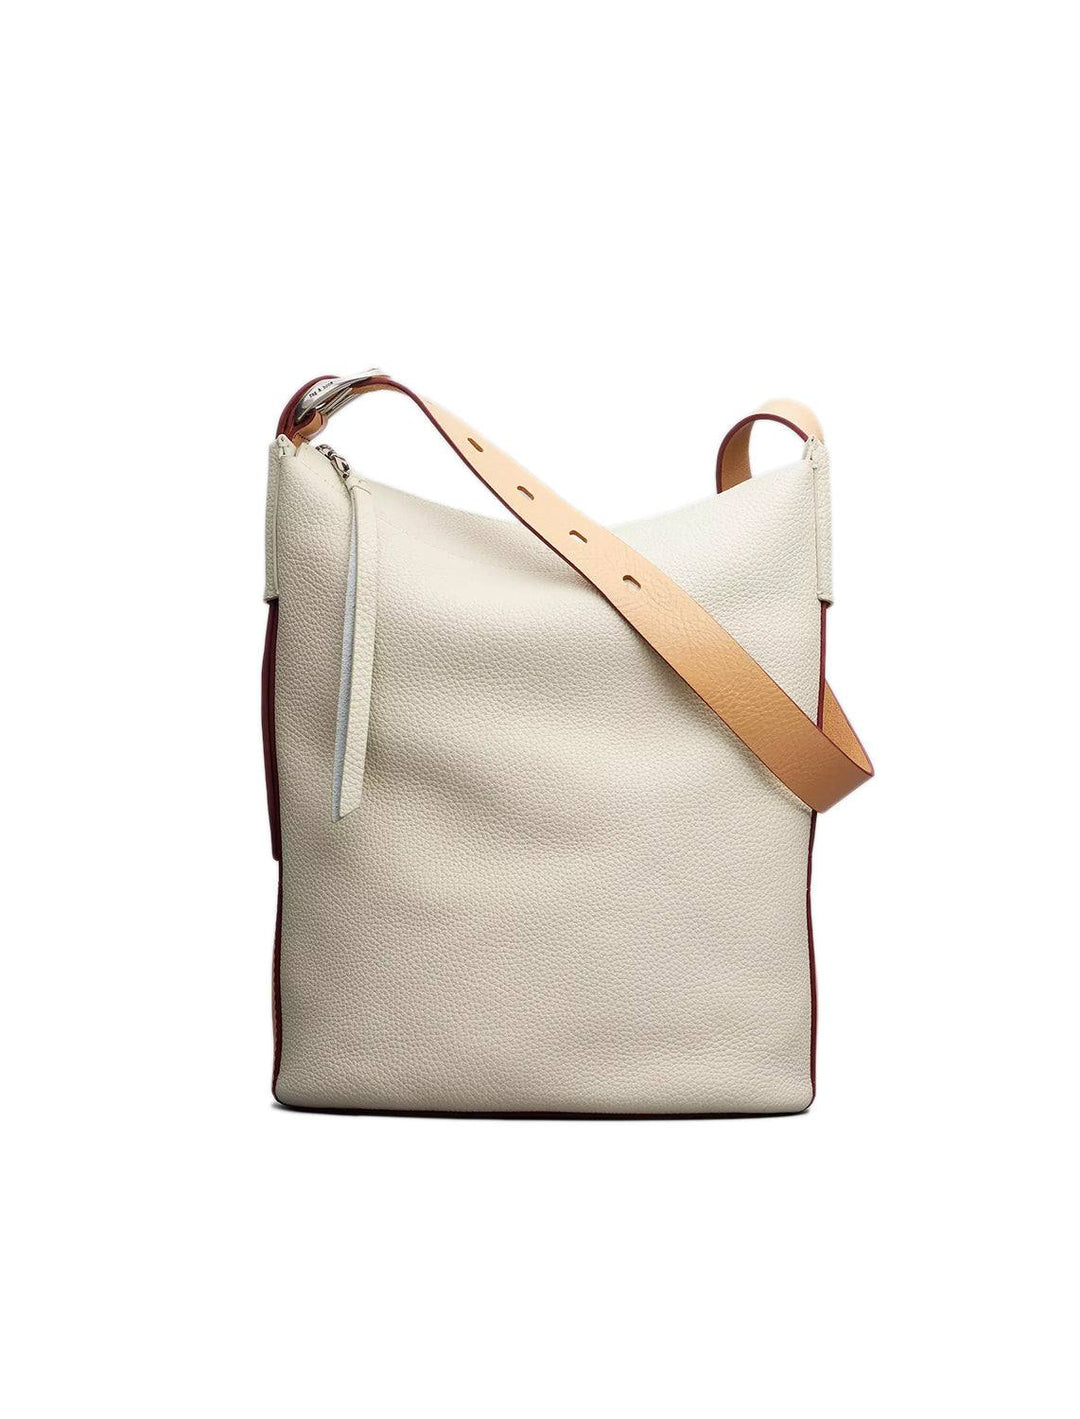 Front view of Rag & Bone's belize bag in antique white.